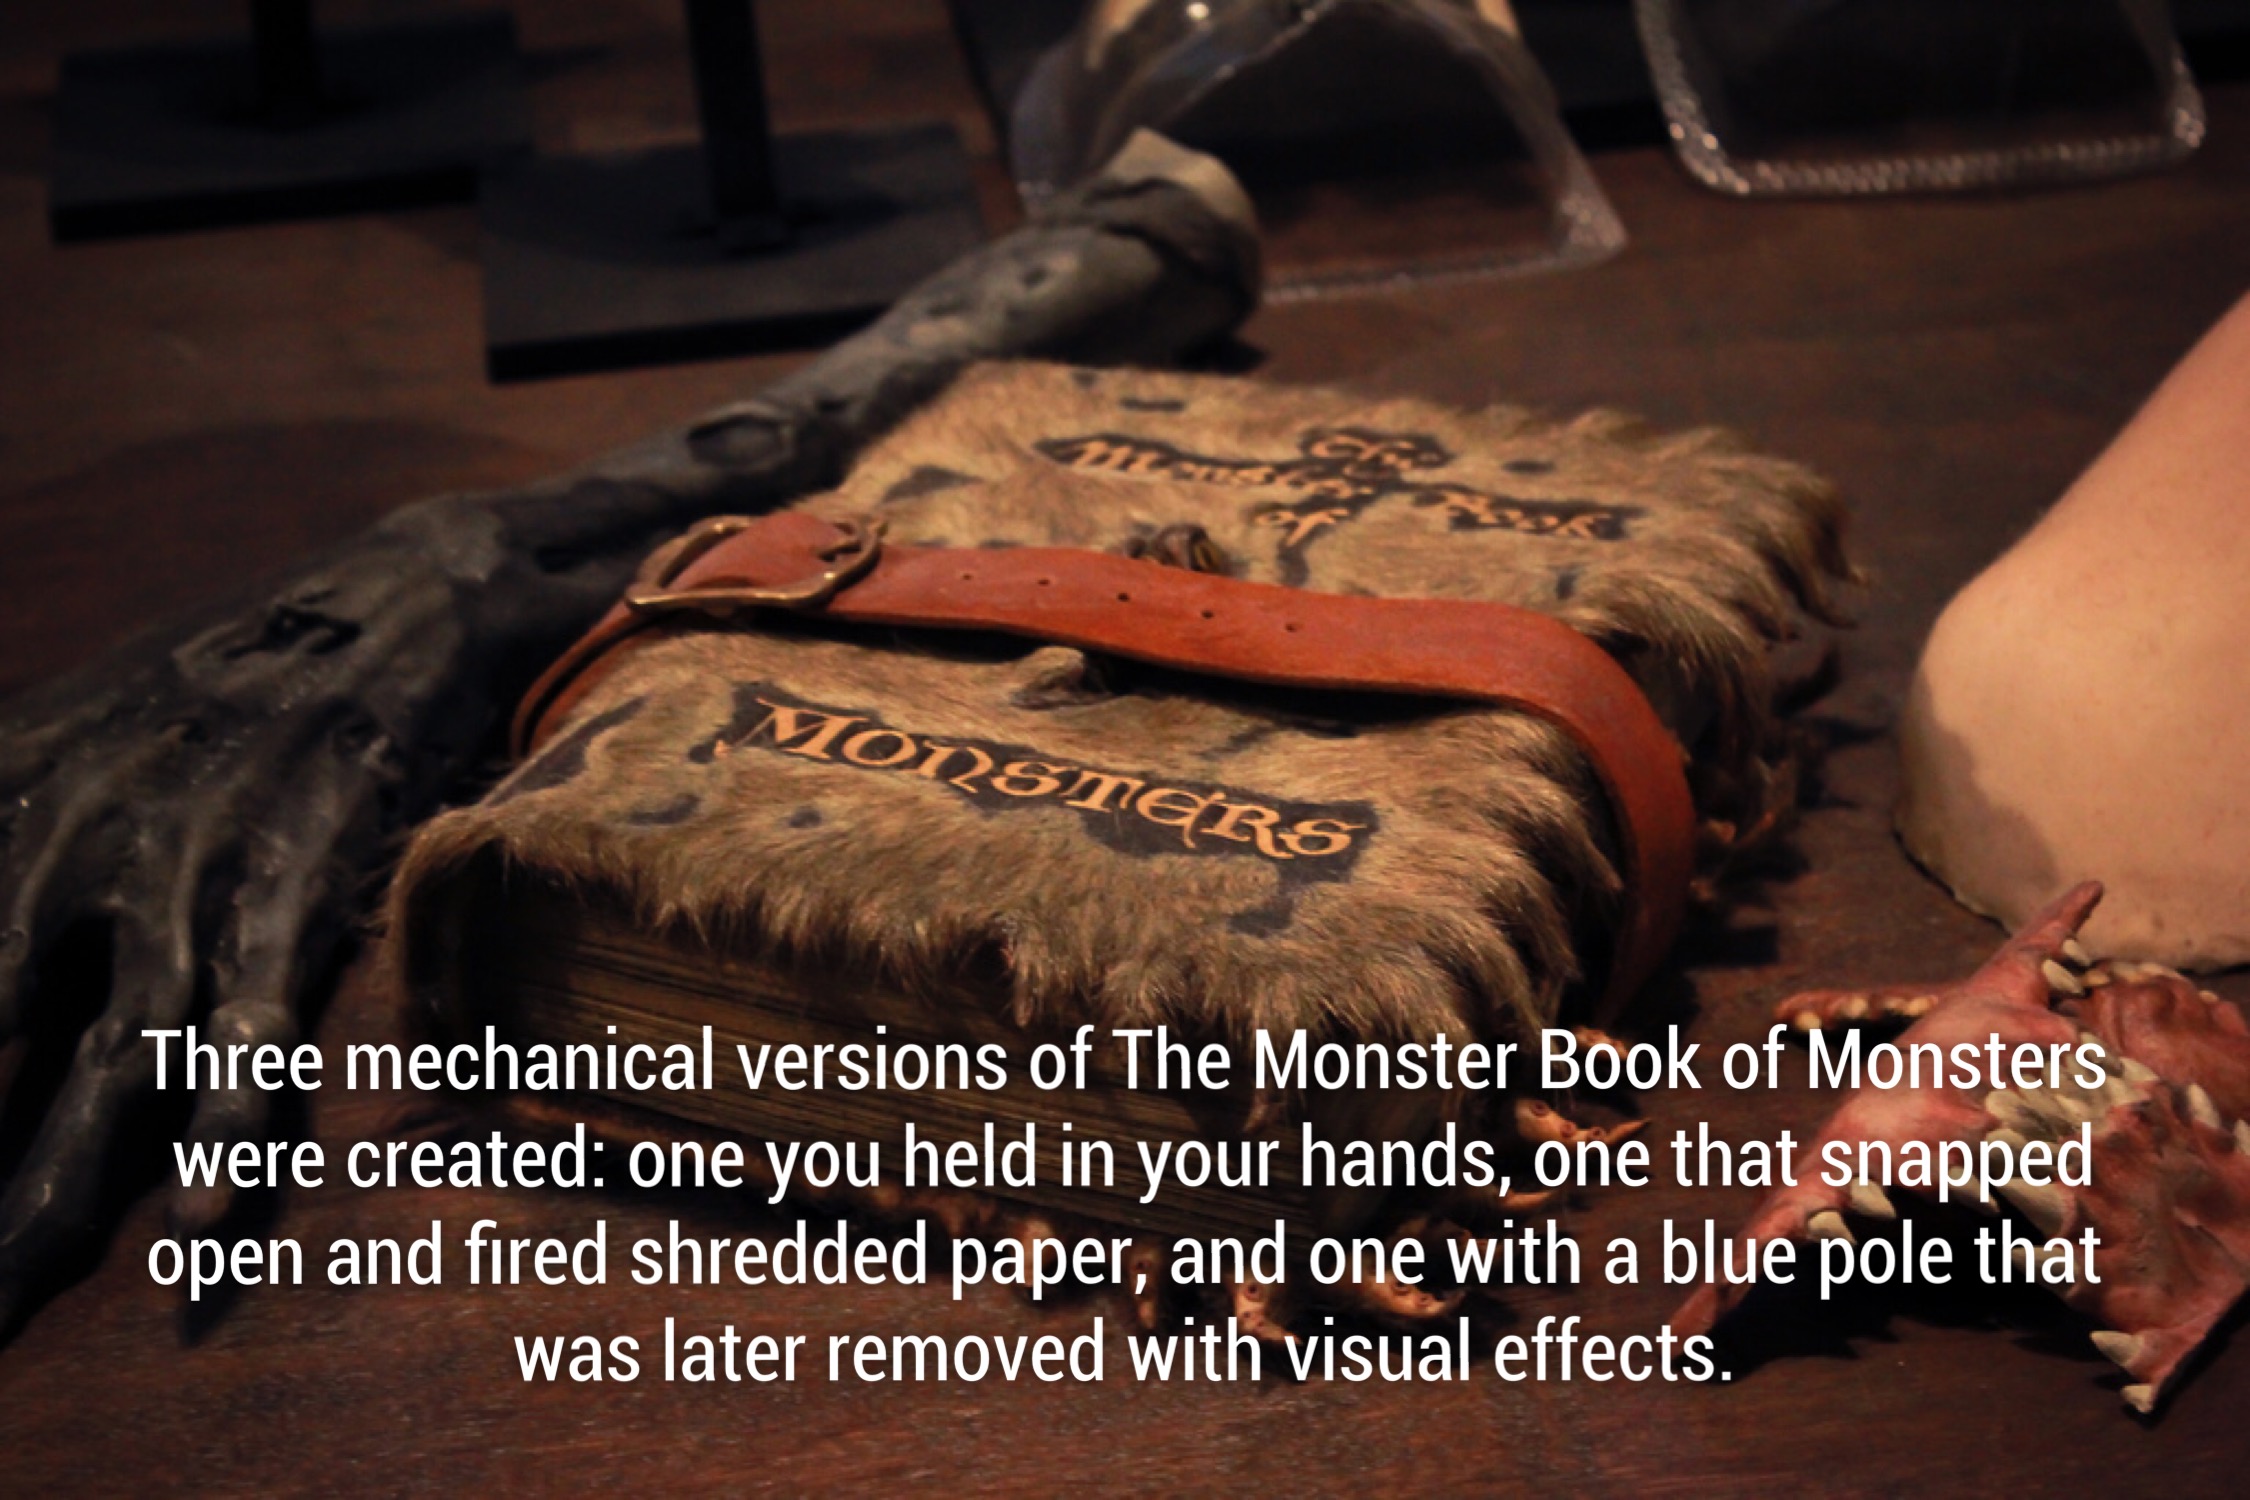 monster book of monsters - Vionsters Three mechanical versions of The Monster Book of Monsters were created one you held in your hands, one that snapped open and fired shredded paper, and one with a blue pole that was later removed with visual effects.